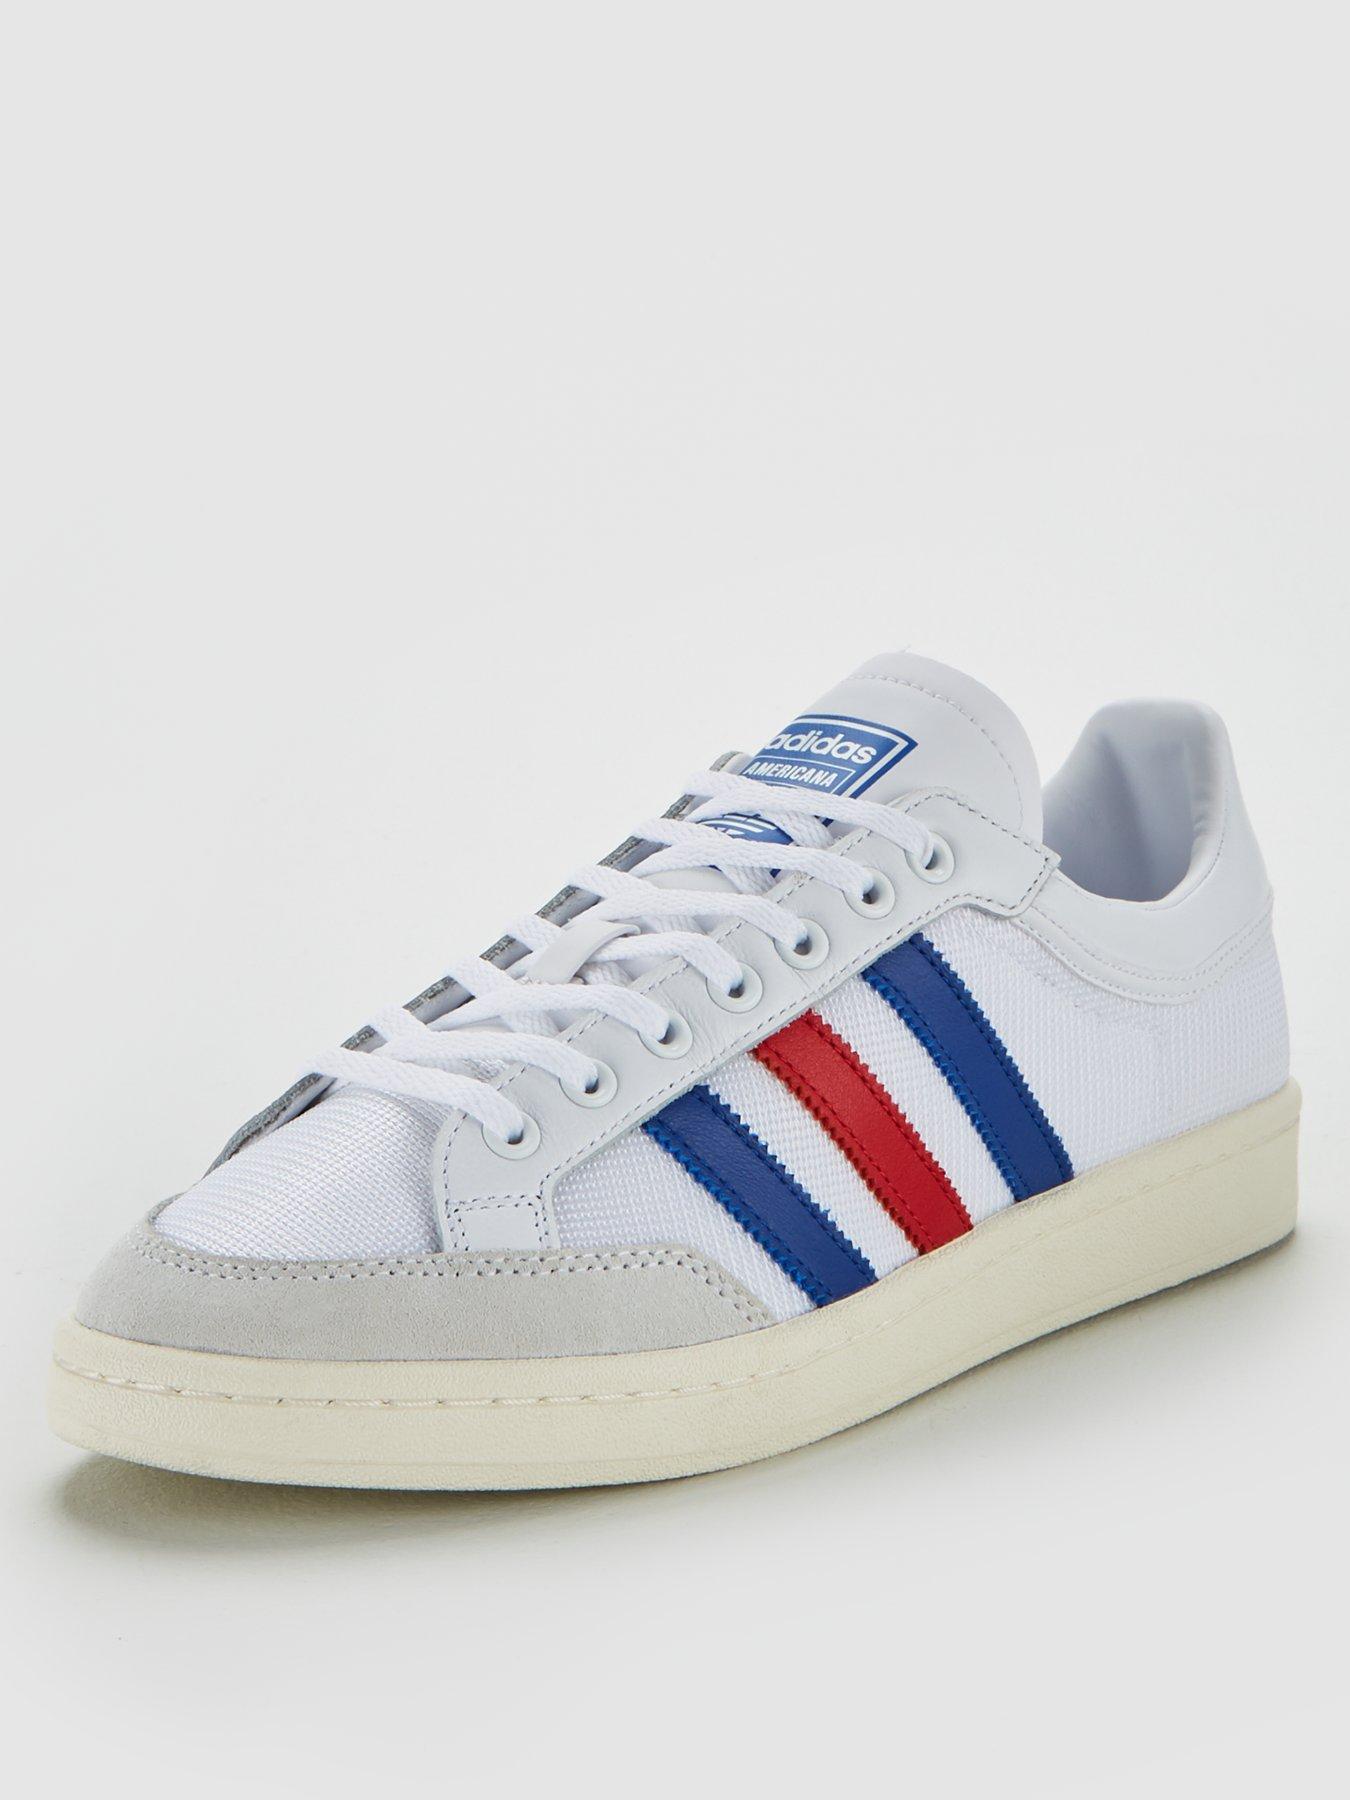 white red blue adidas